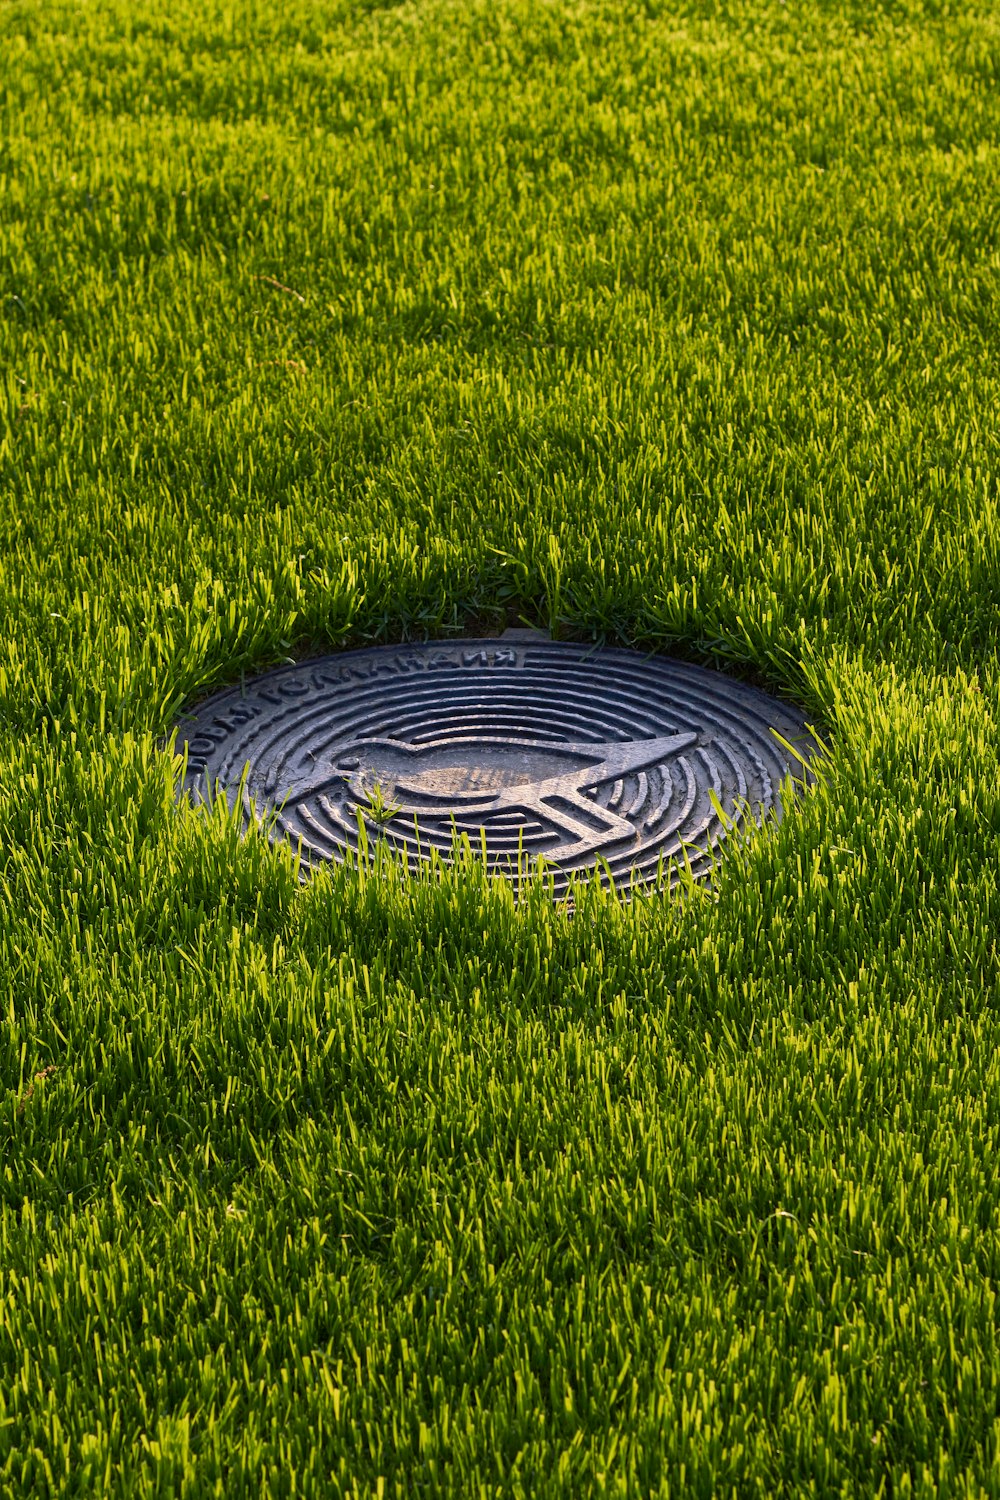 a drain in the middle of a grassy field